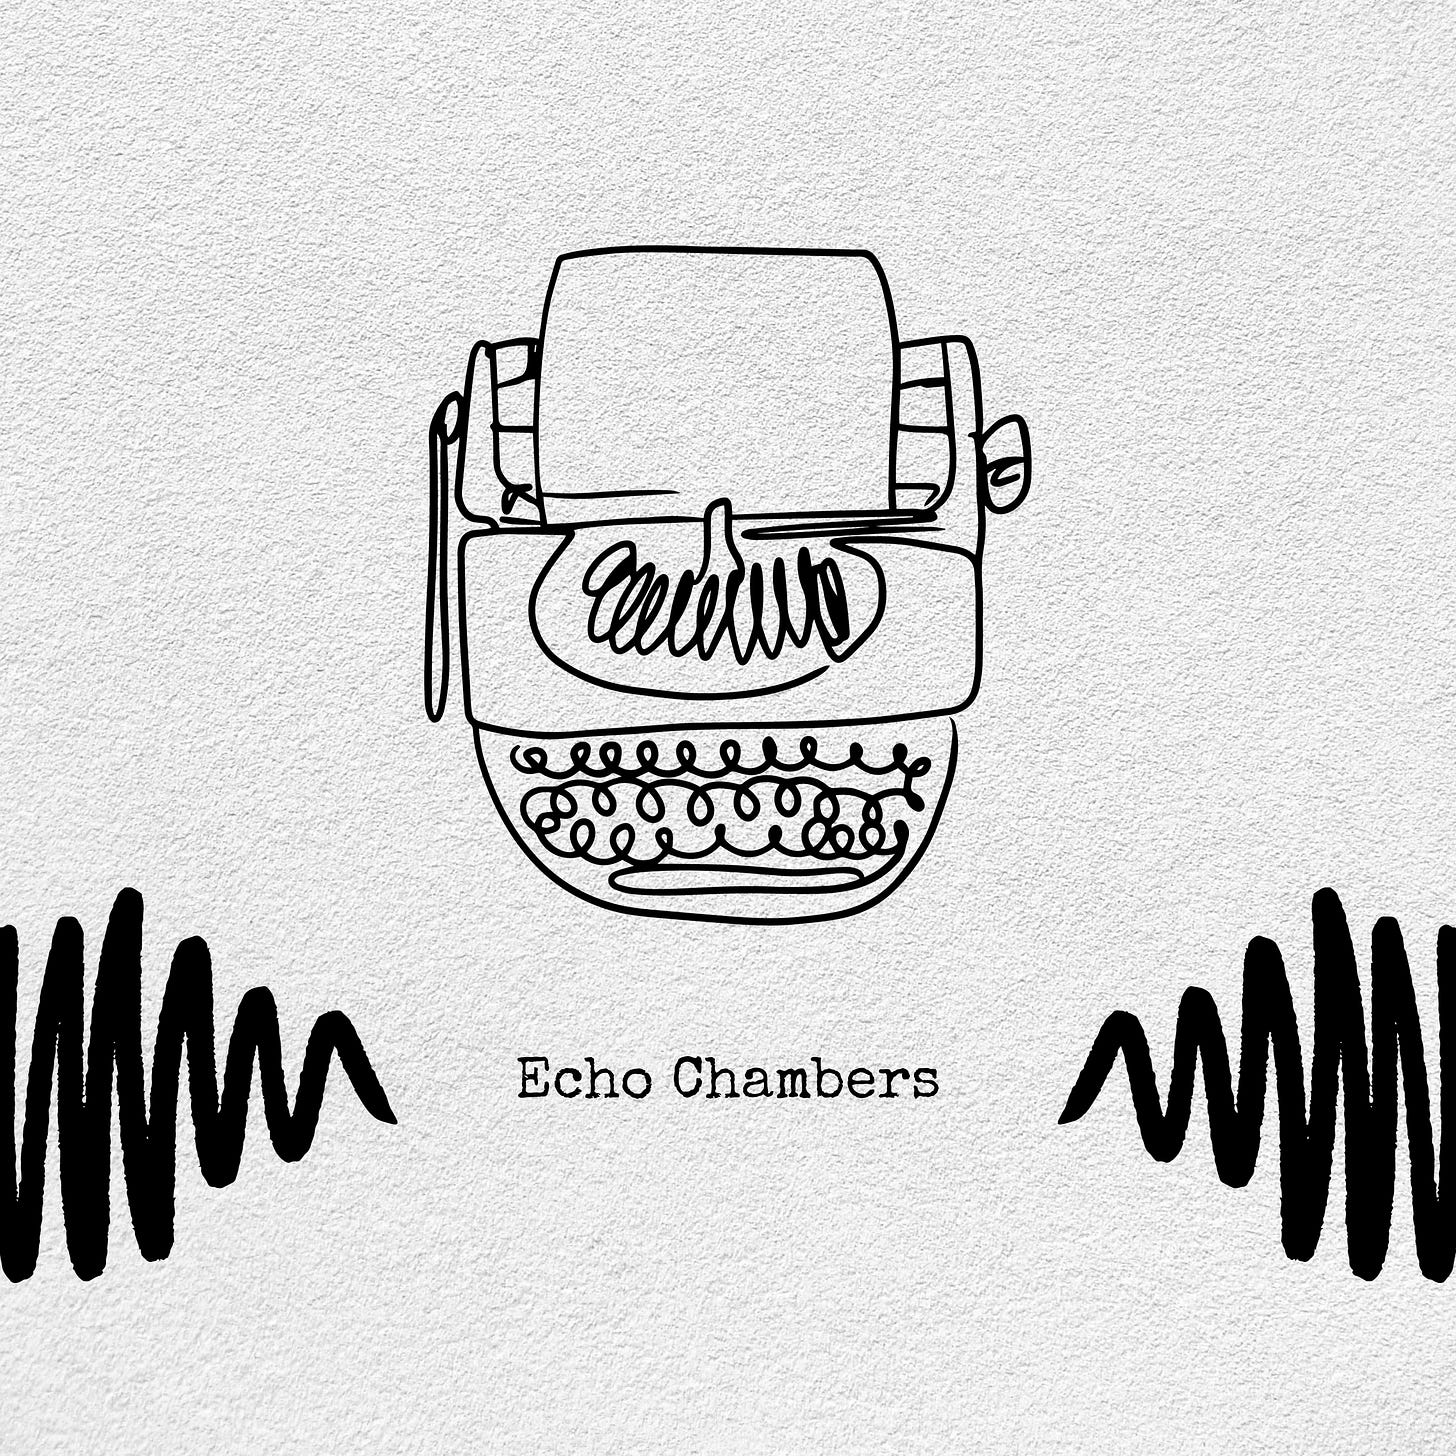 a doddle of a typewriter, a scribble and the words Echo Chambers